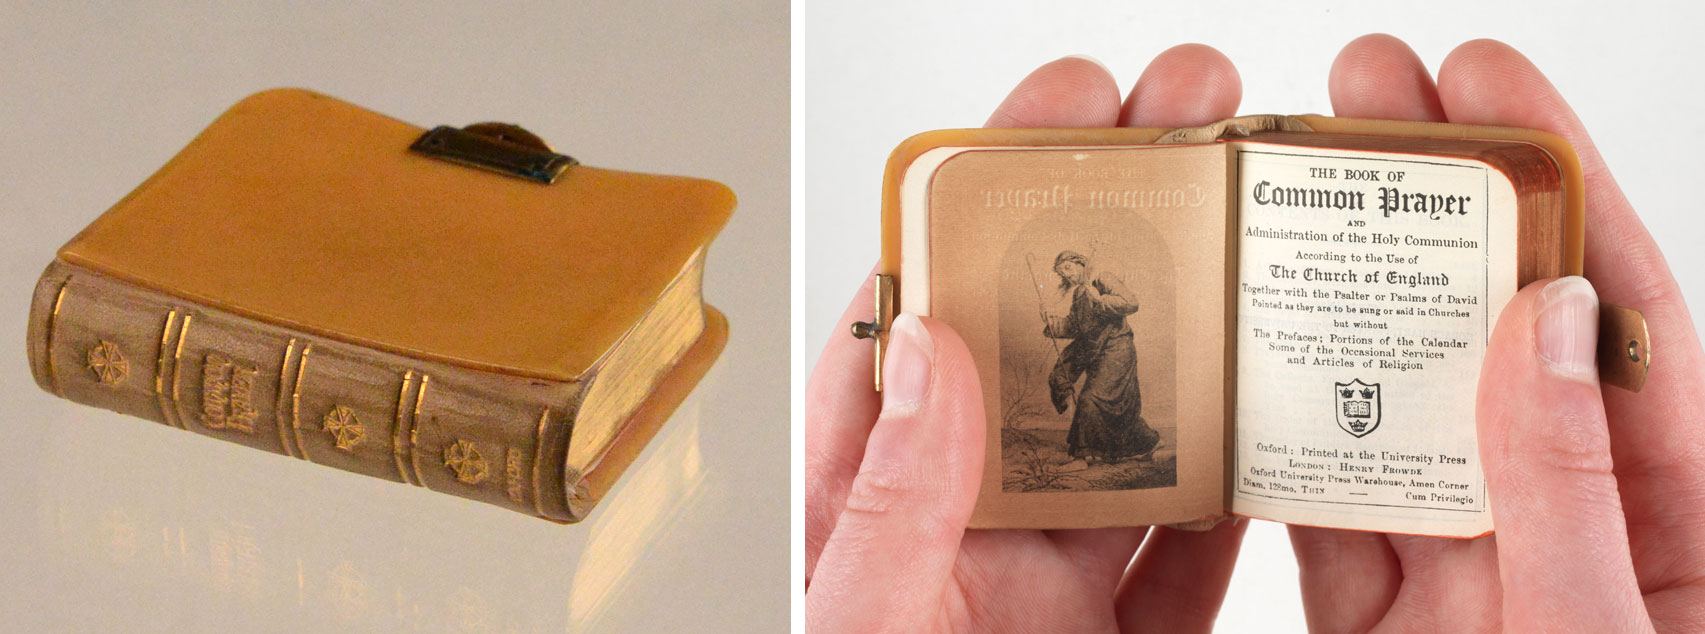 A miniature yellow book shown closed and open with an illustration of a kneeling monk and the title "The Book of Common Prayer"